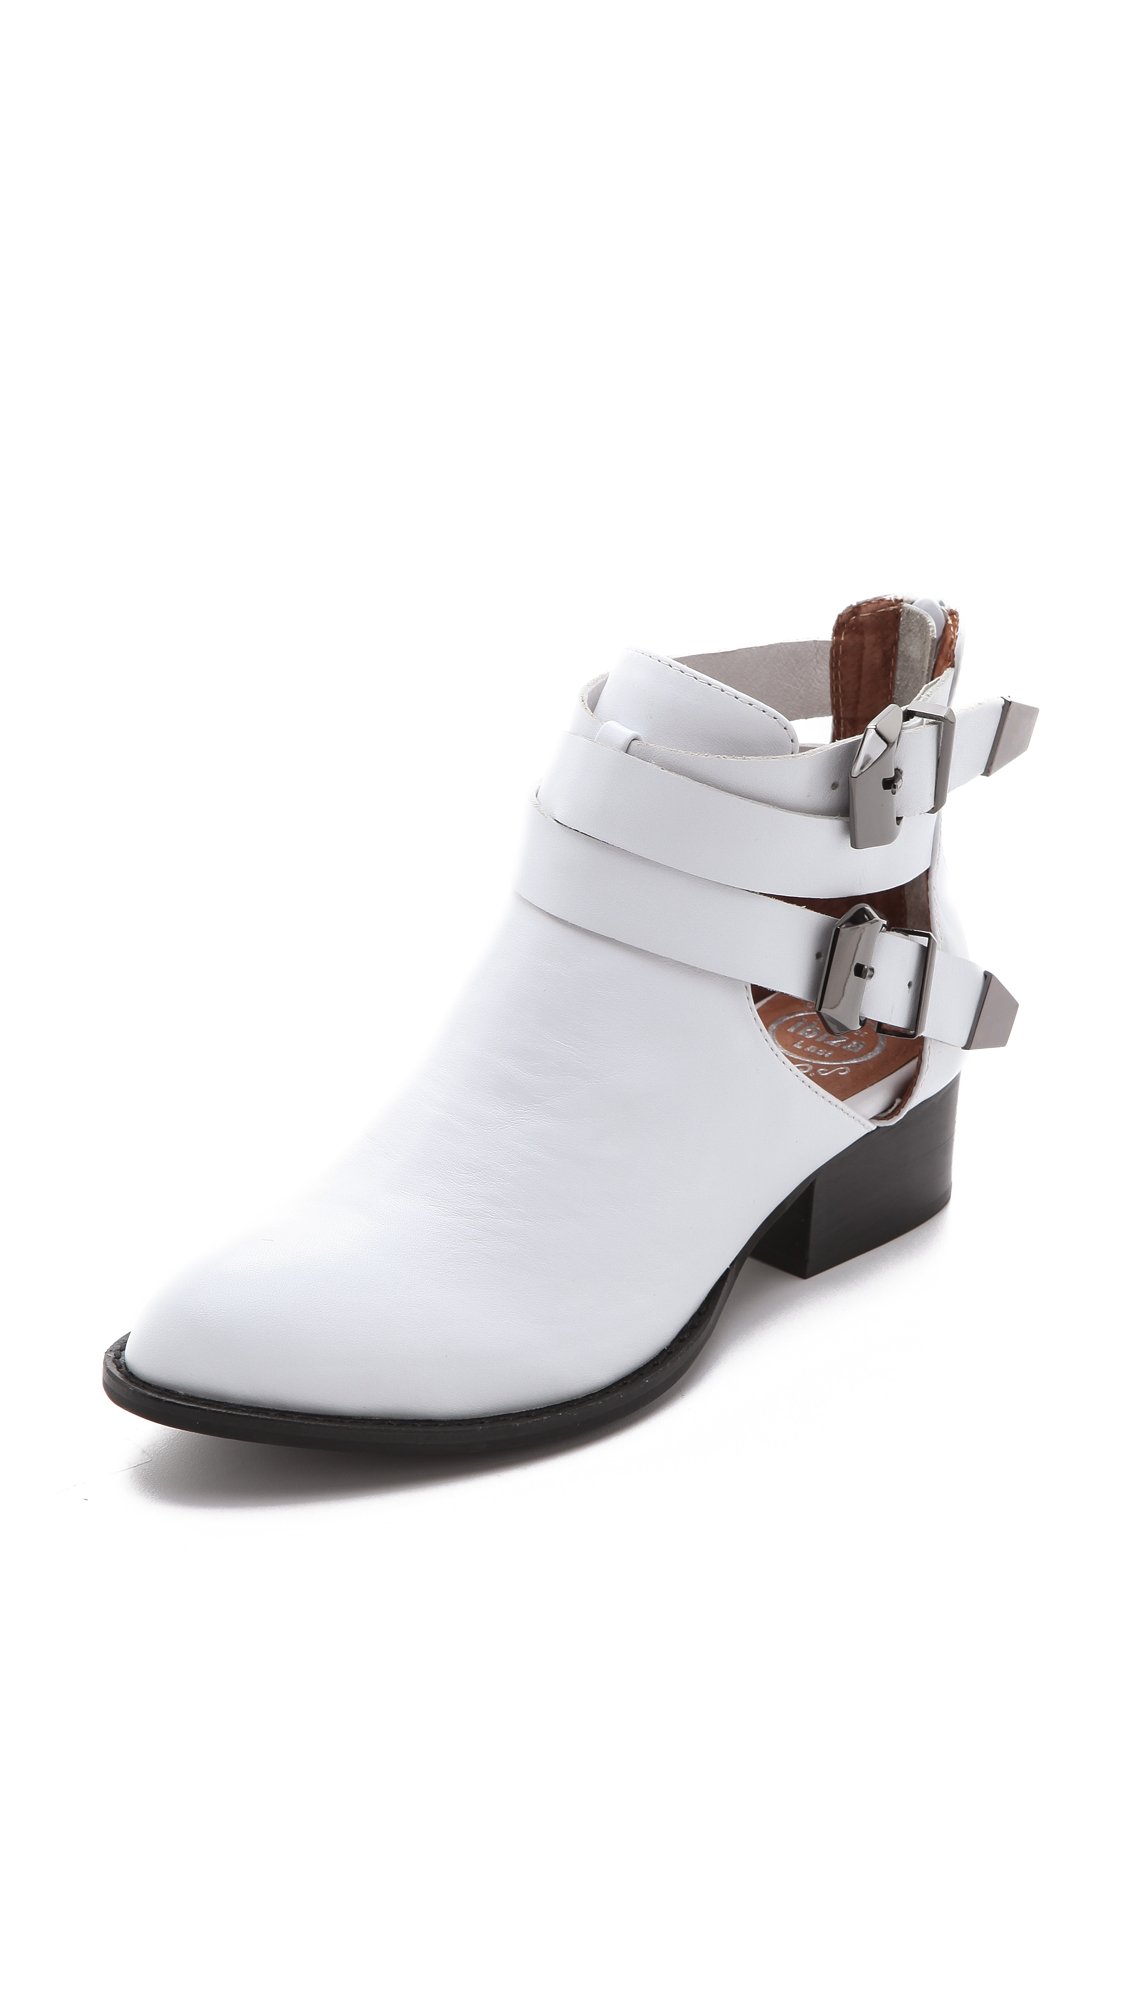 Lyst - Jeffrey campbell Everly Cutout Booties in White